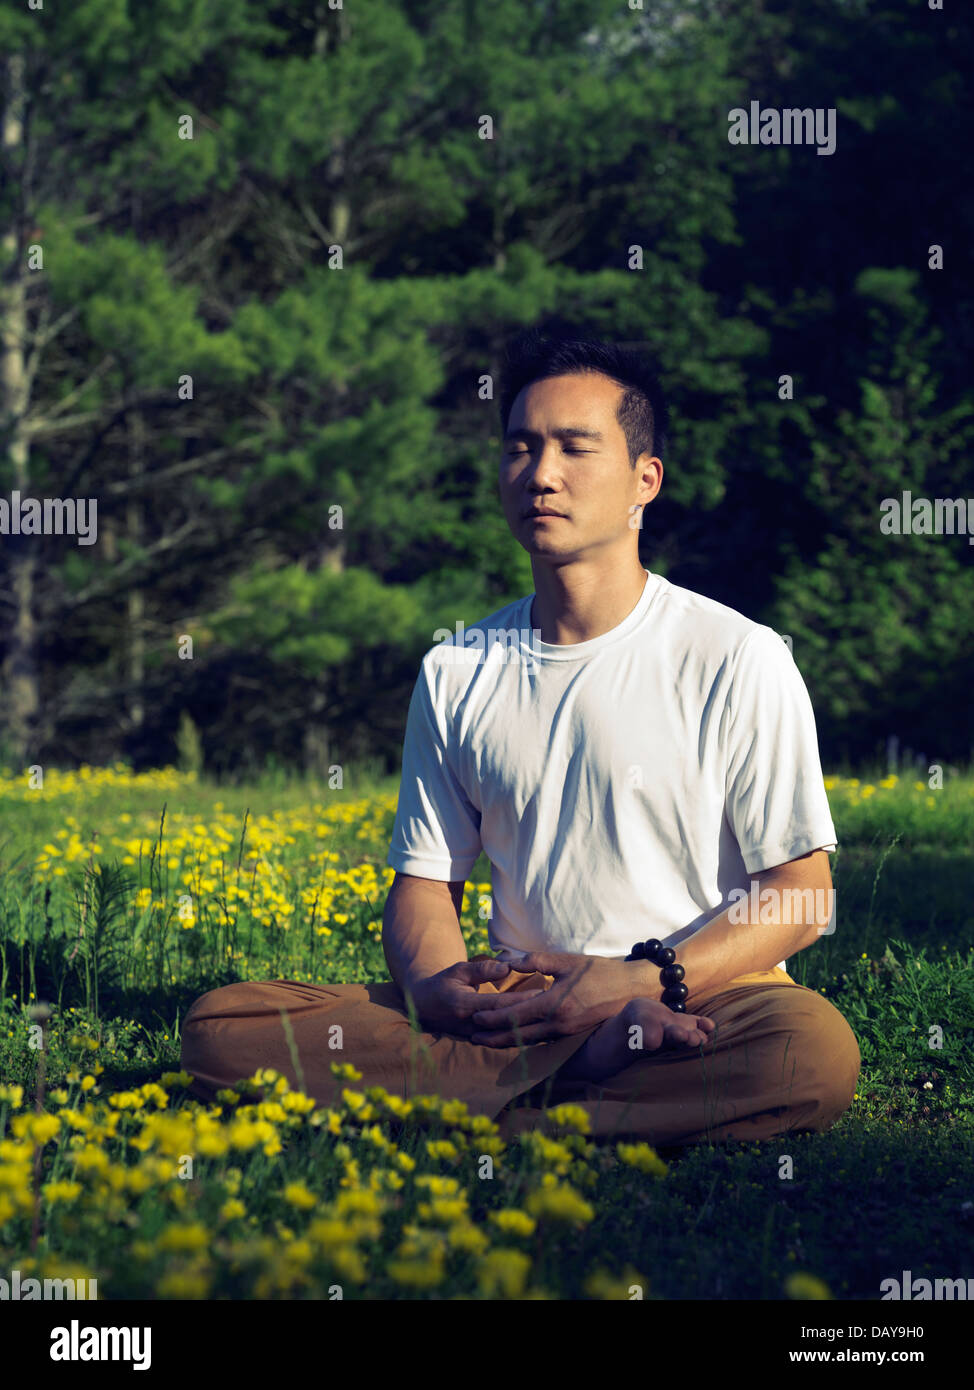 License available at MaximImages.com - Asian man practising Chinese Buddhist meditation during sunrise in outdoor summer nature scenery Stock Photo